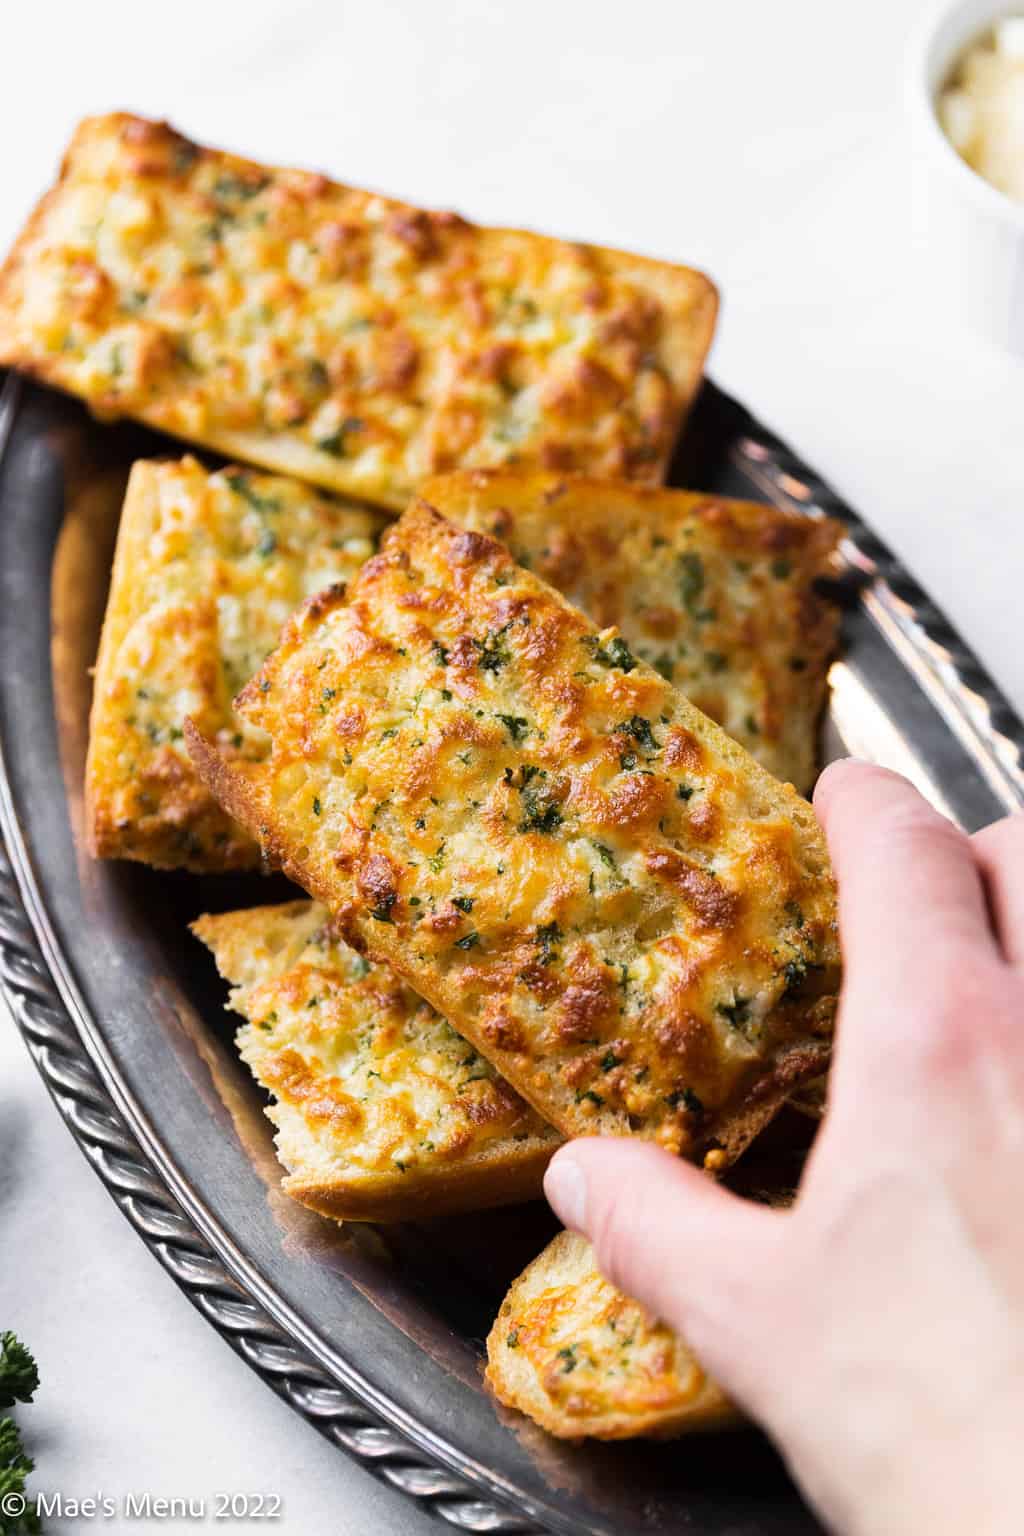 A hand grabbing a piece of garlic bread from a tray.